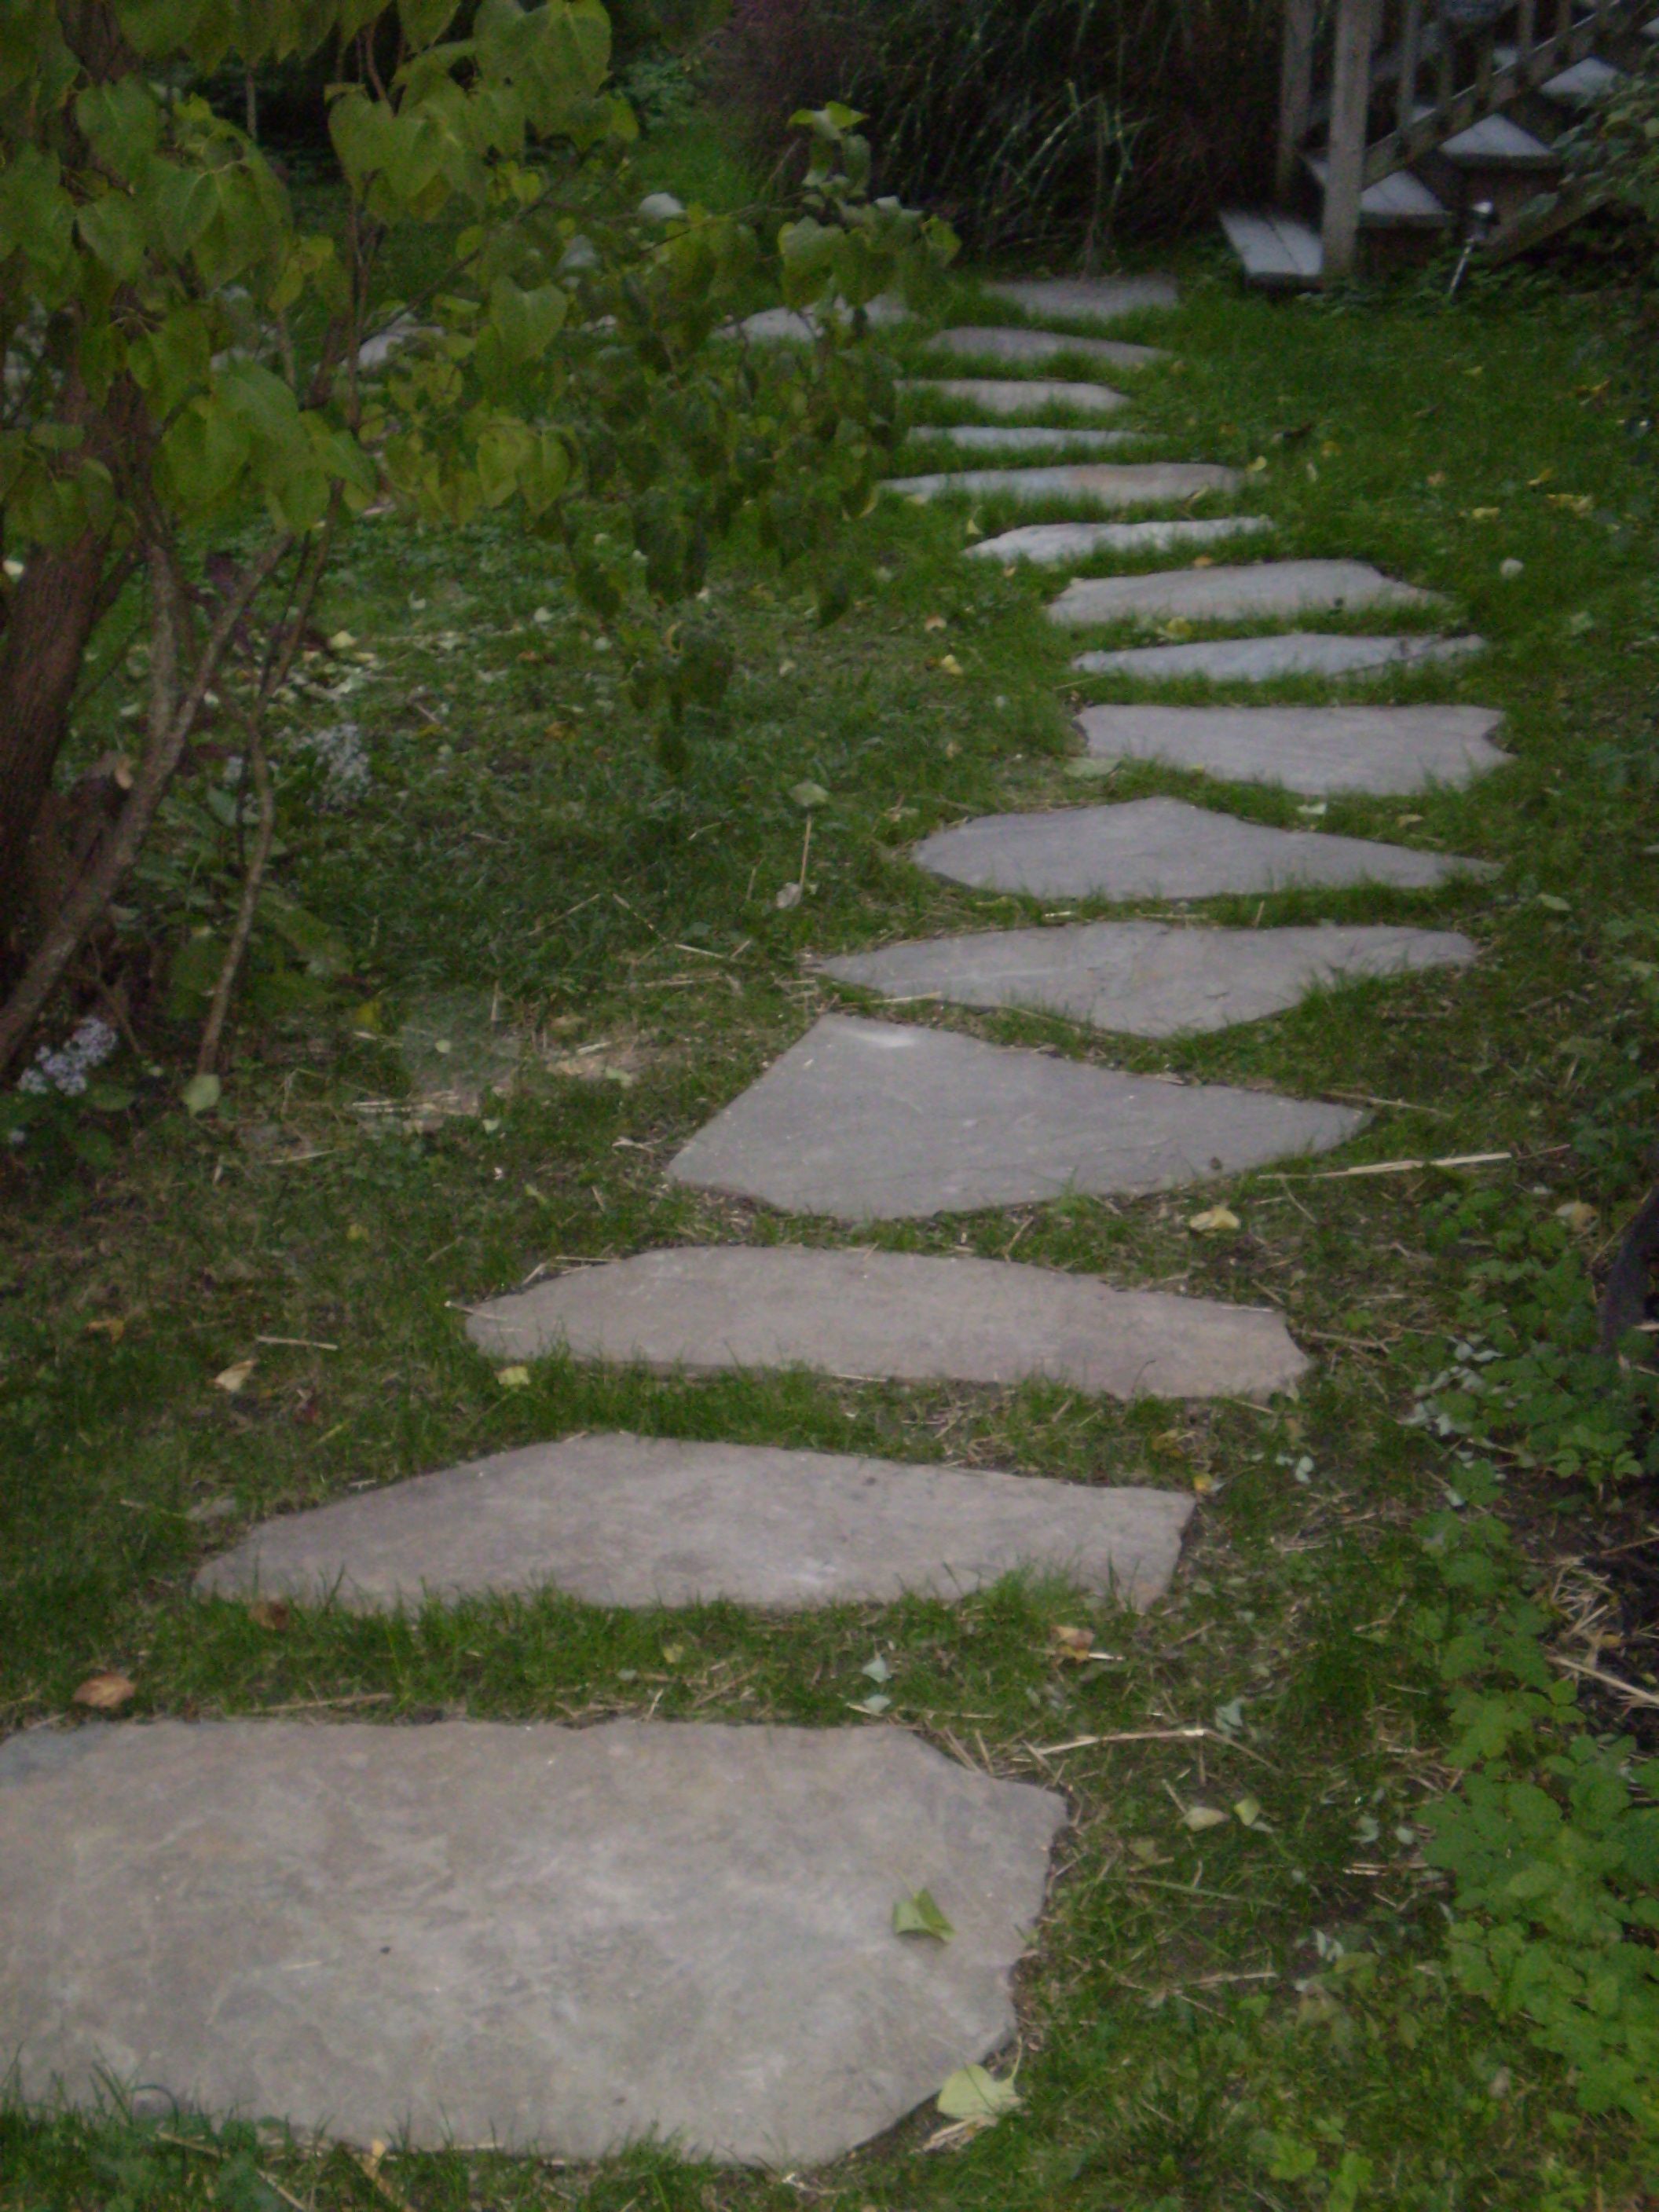 stepping stones in grass - Google Search | Patio/Porches/Yard ...